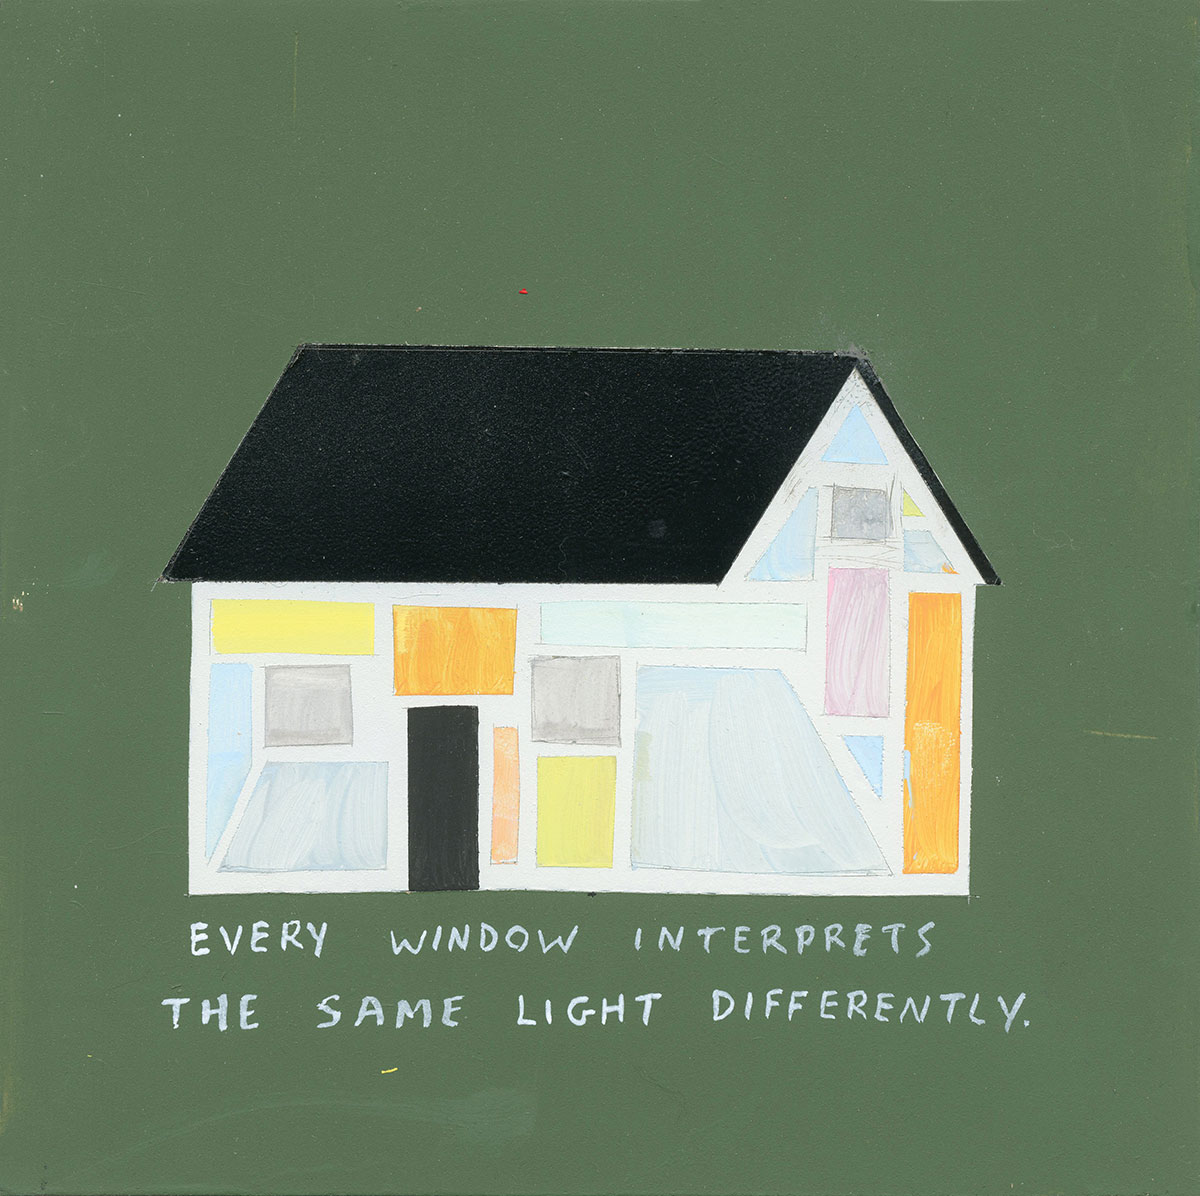 A painting of a house full of windows with the phrase every window interprets the same light differently written on the canvas.